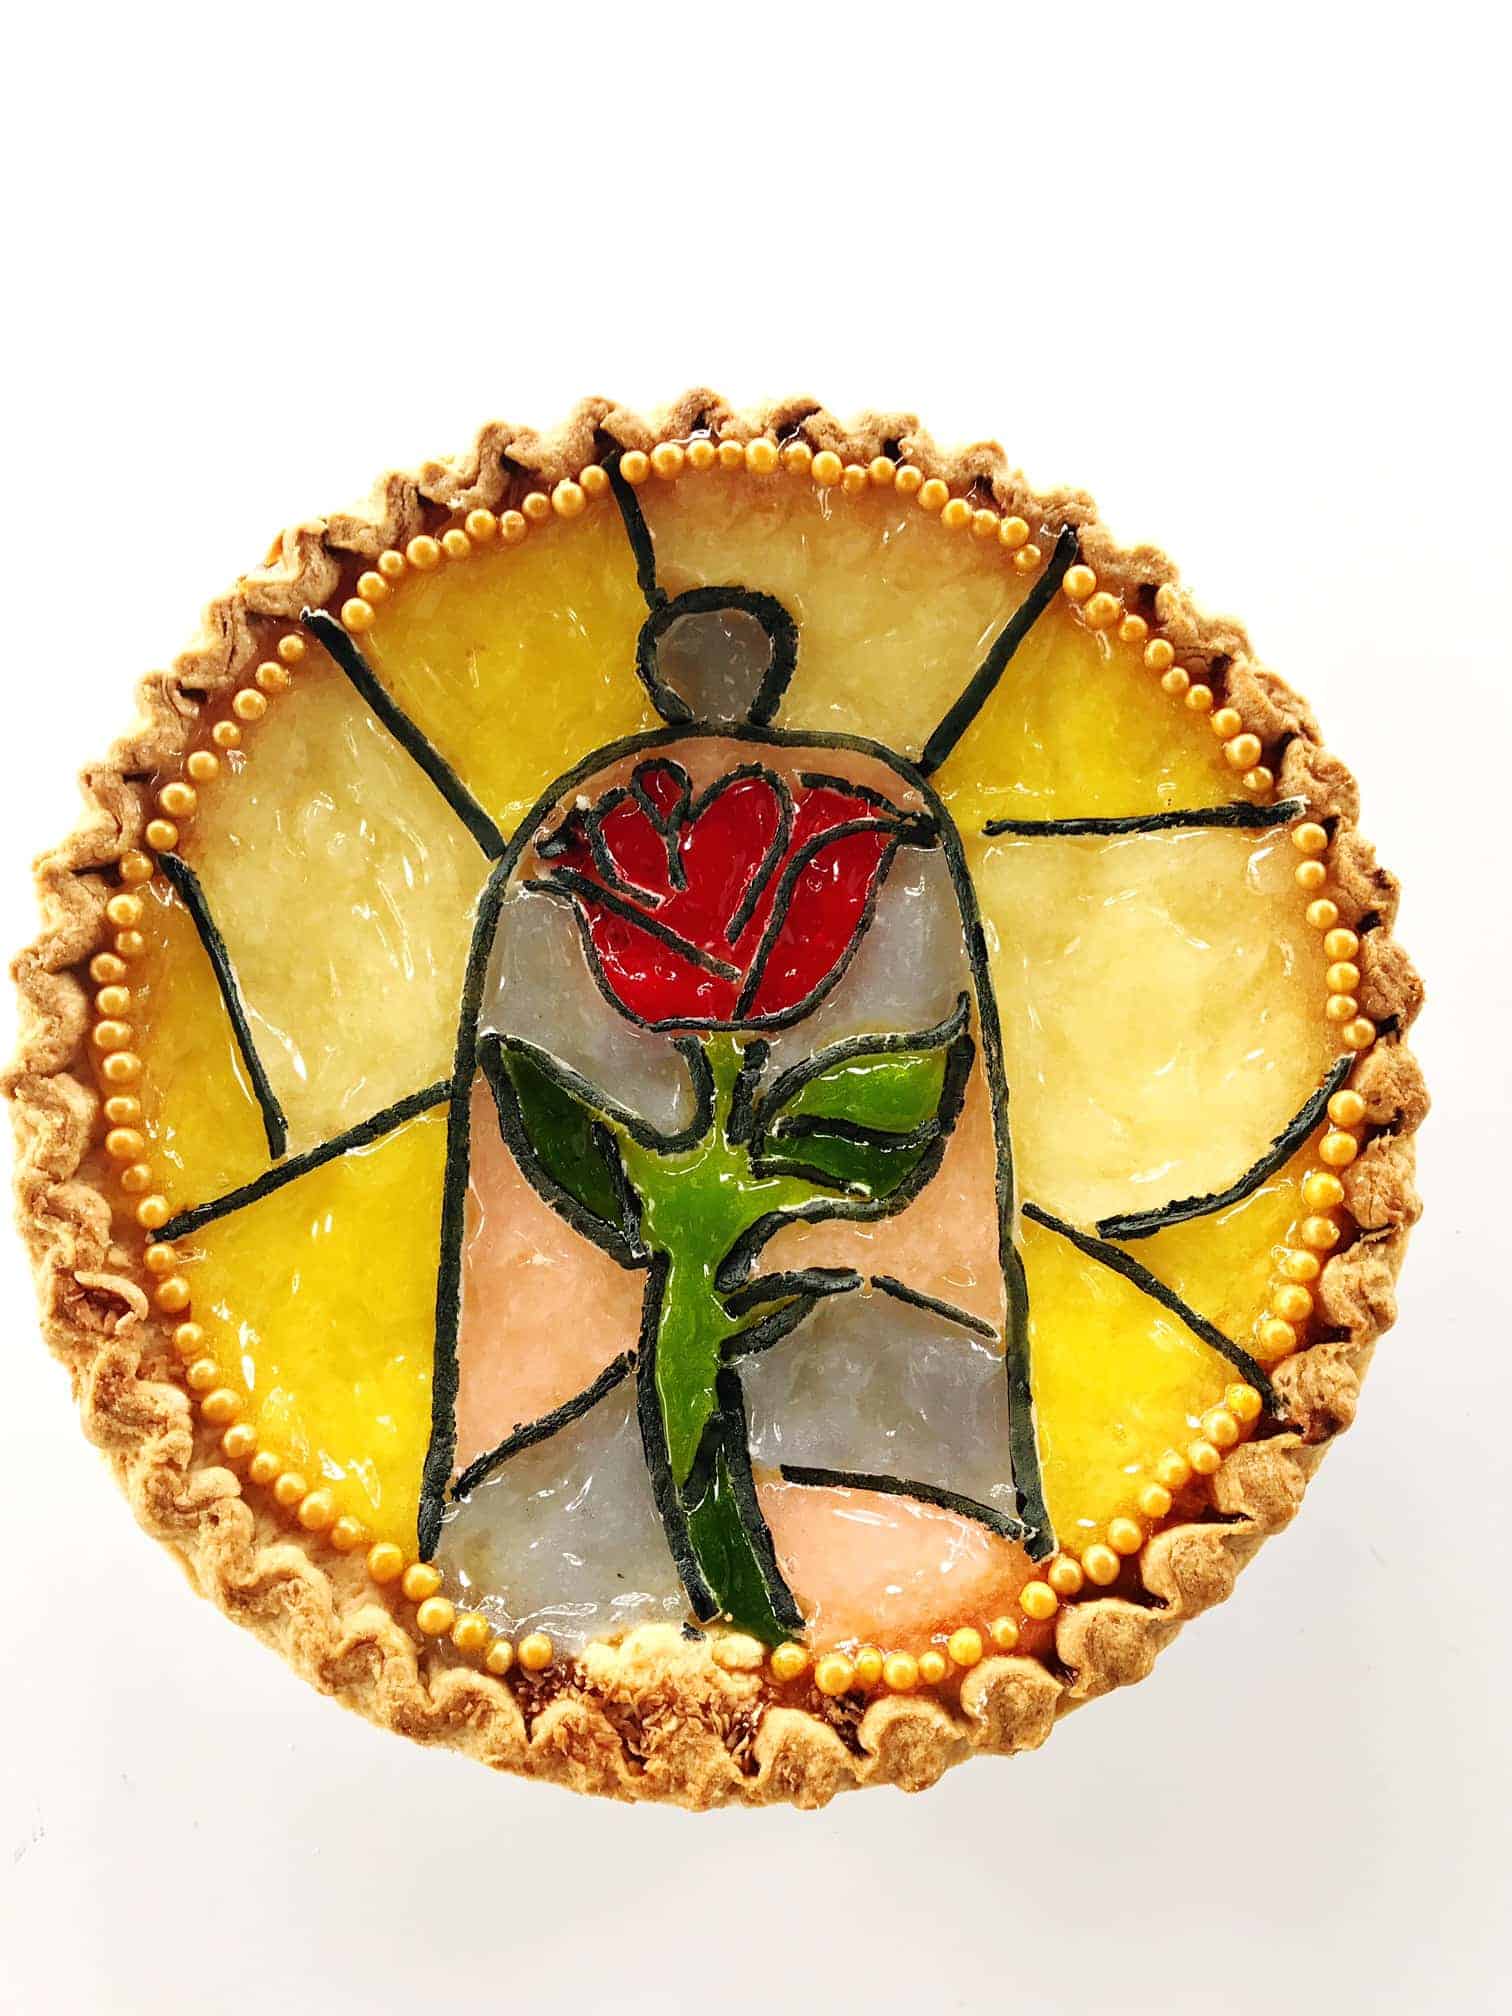 Make a Beauty and the Beast Pie in 5 steps with these easy hacks.